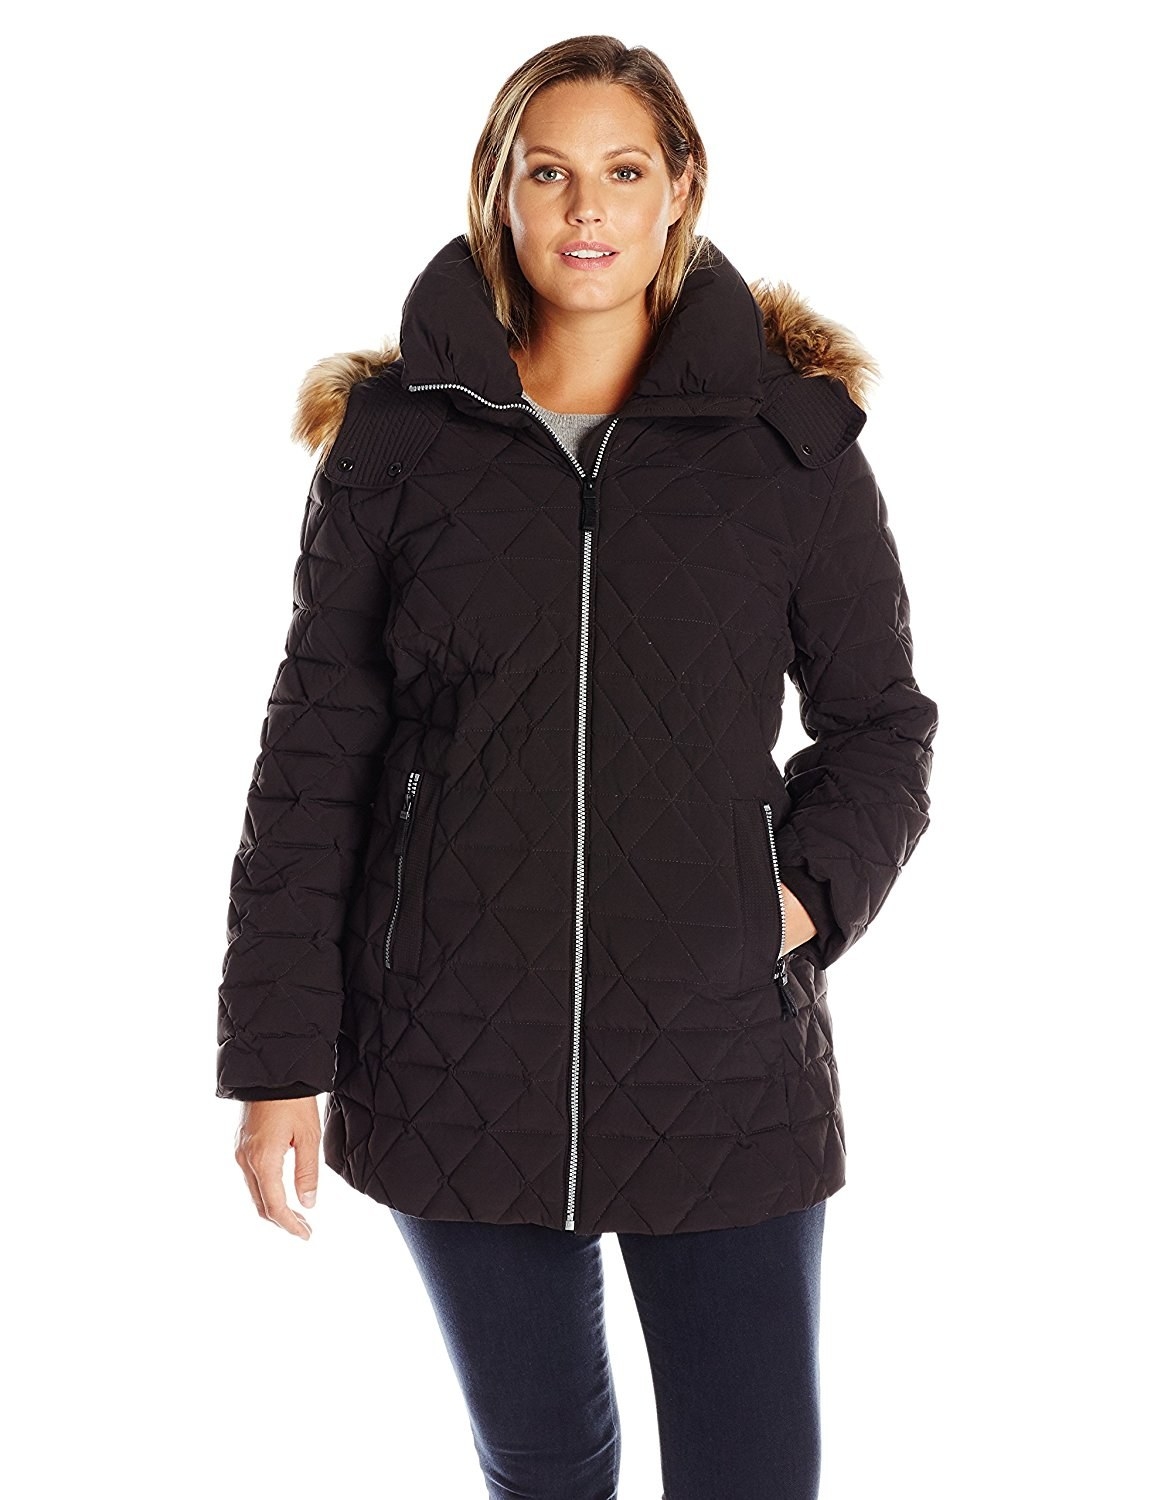 Best Places To Buy Inexpensive Coats Online